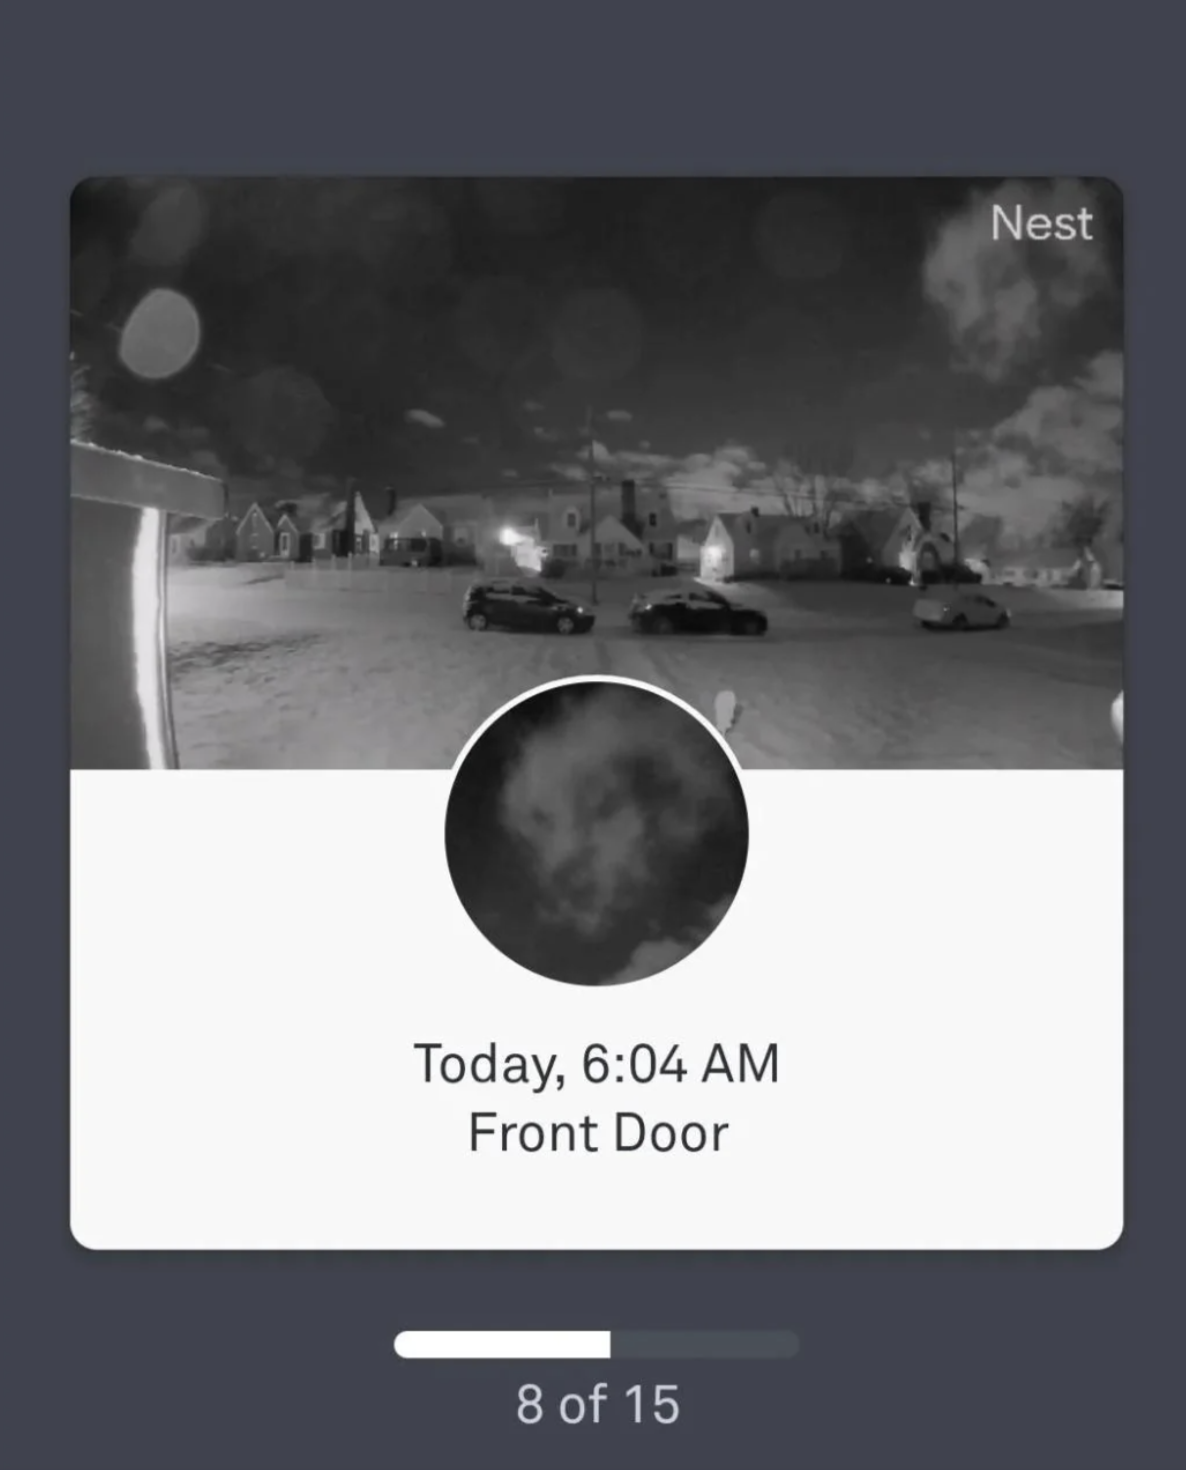 Nest camera footage shows a snowy neighborhood captured at 6:04 AM with the label "Front Door."